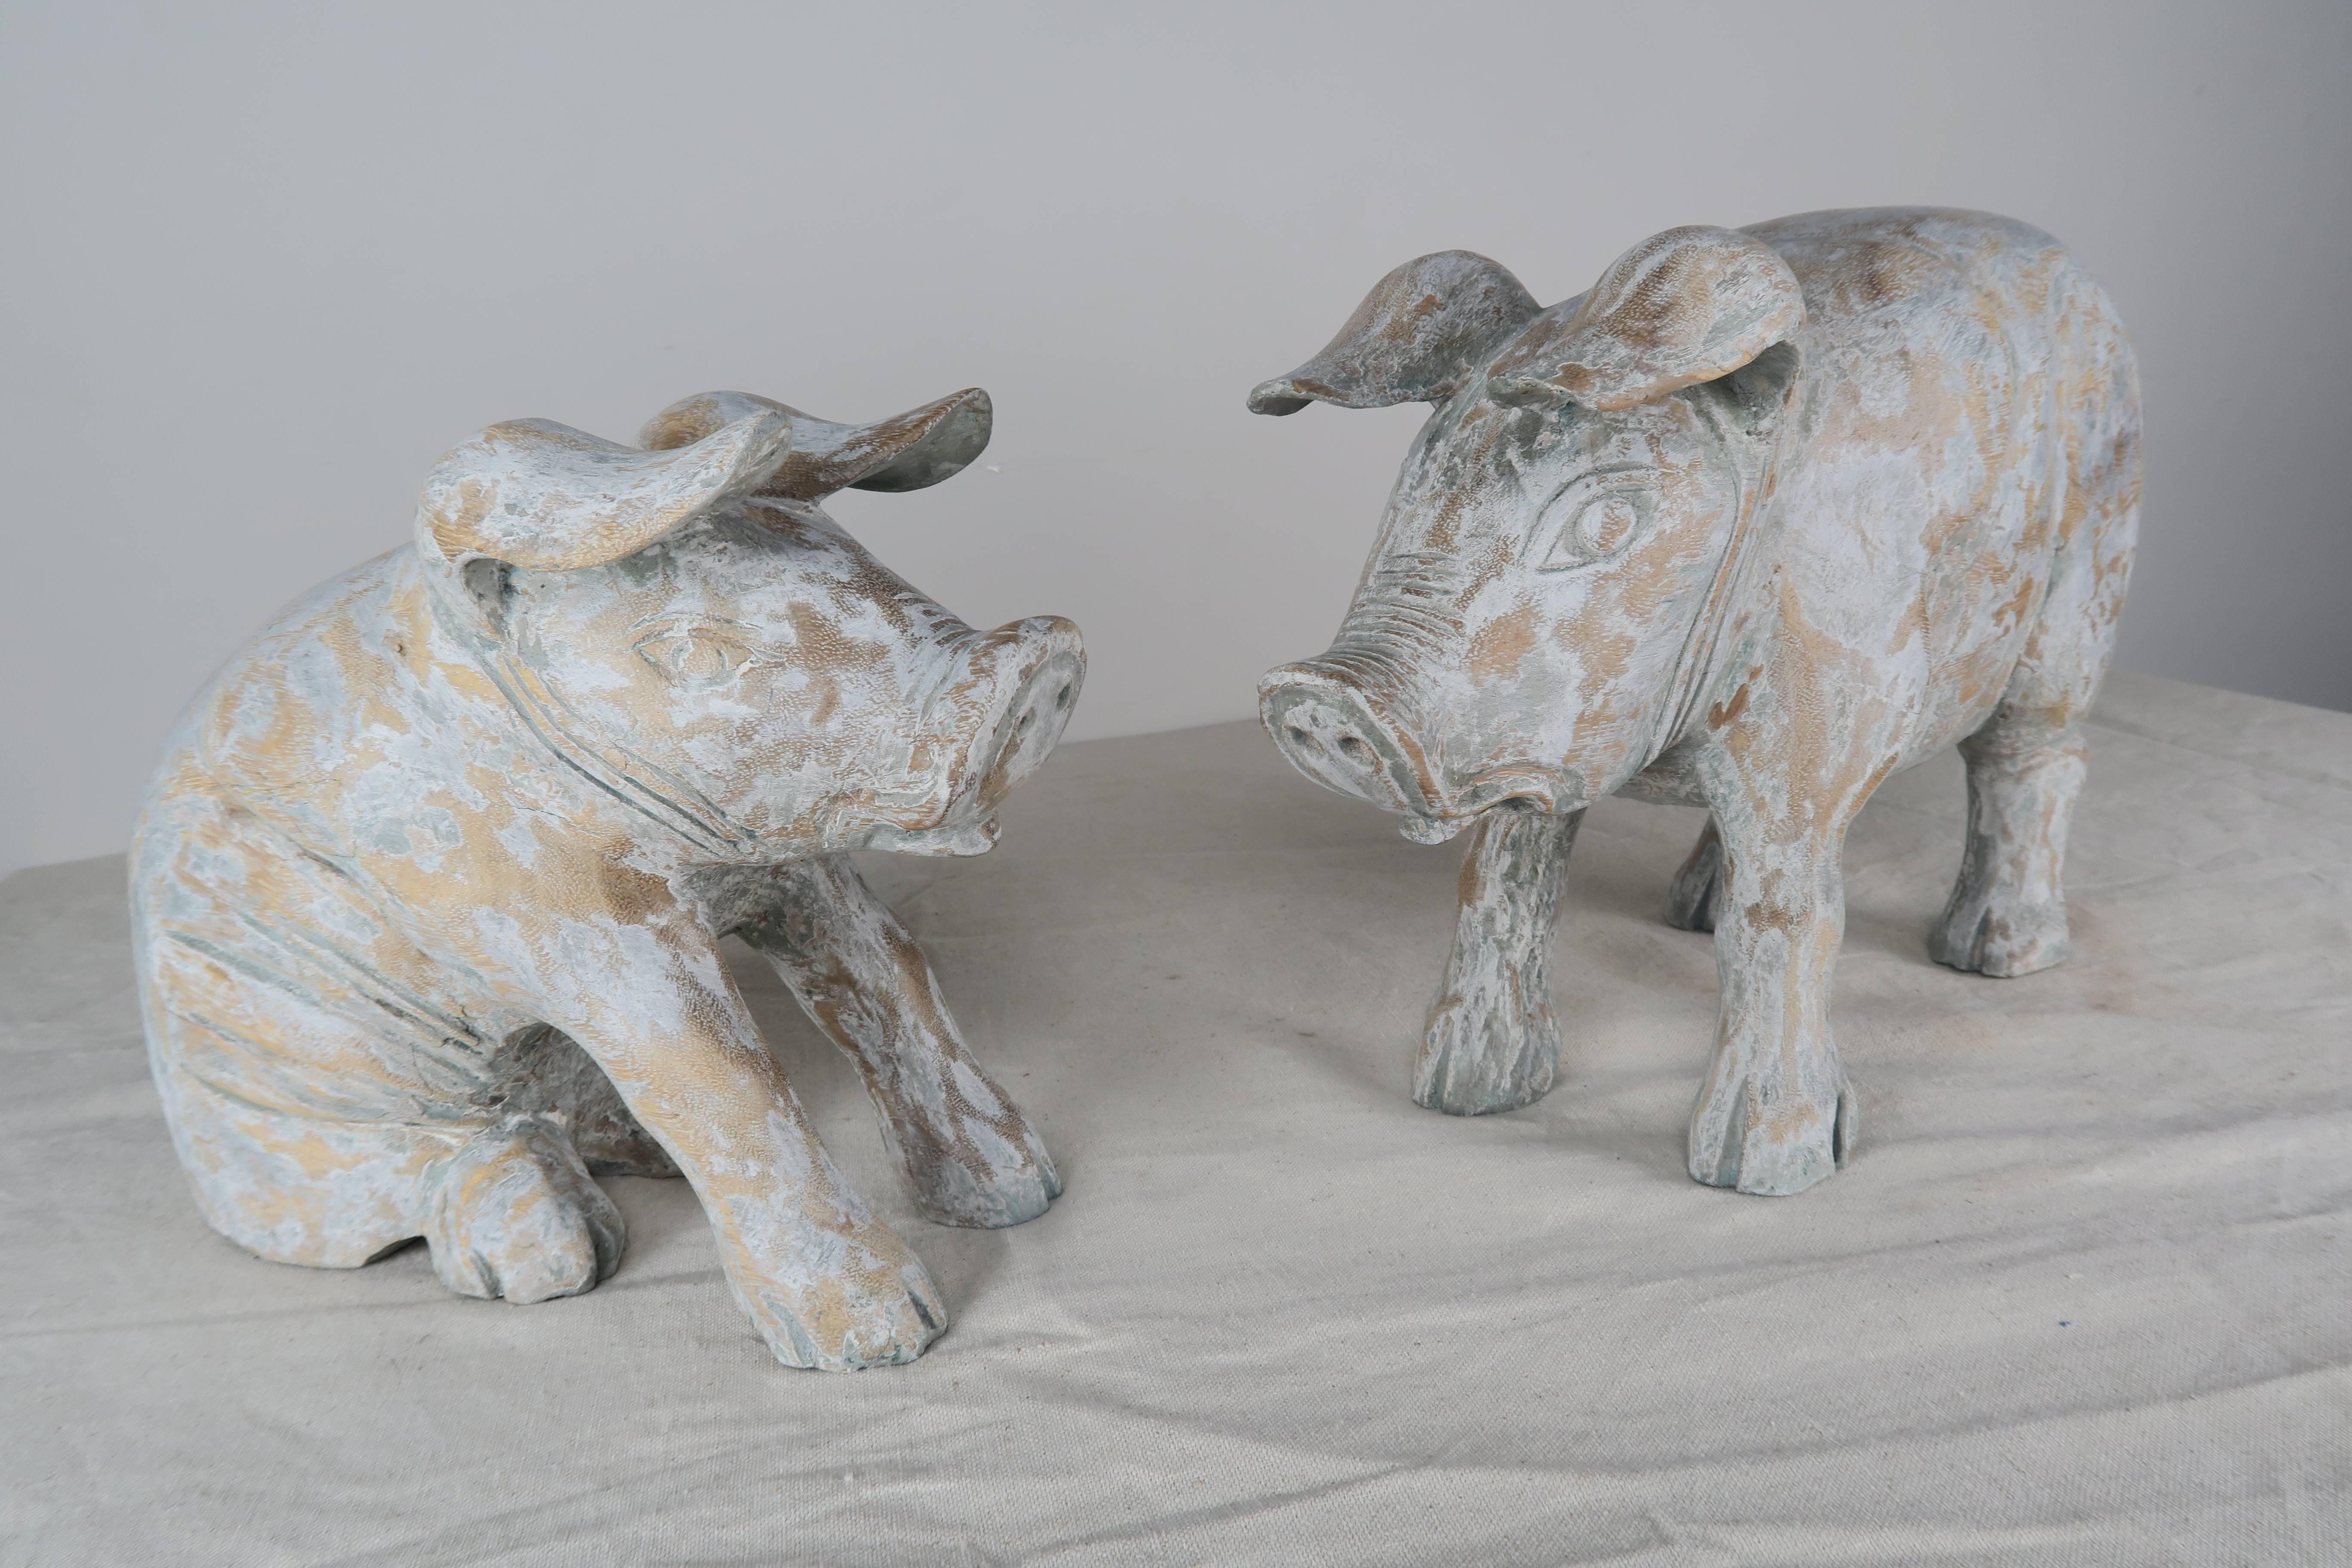 Pair of charming carved wood painted pigs.

Smaller seated pig is 12